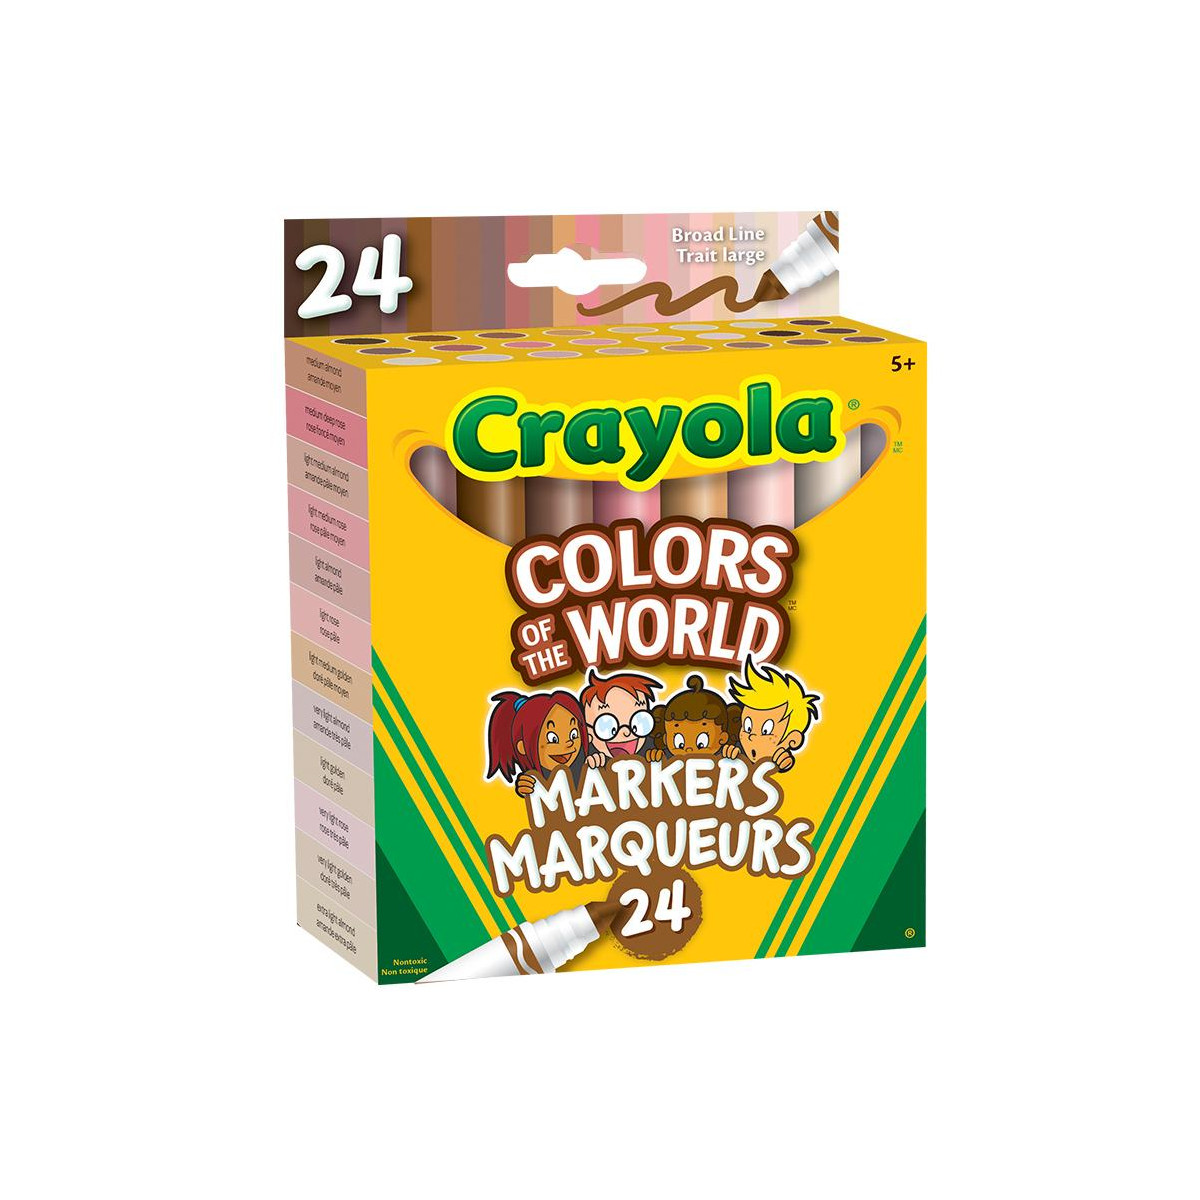 Crayola Color Wonder Mess-Free Colouring Pages & Mini Markers, Blue's